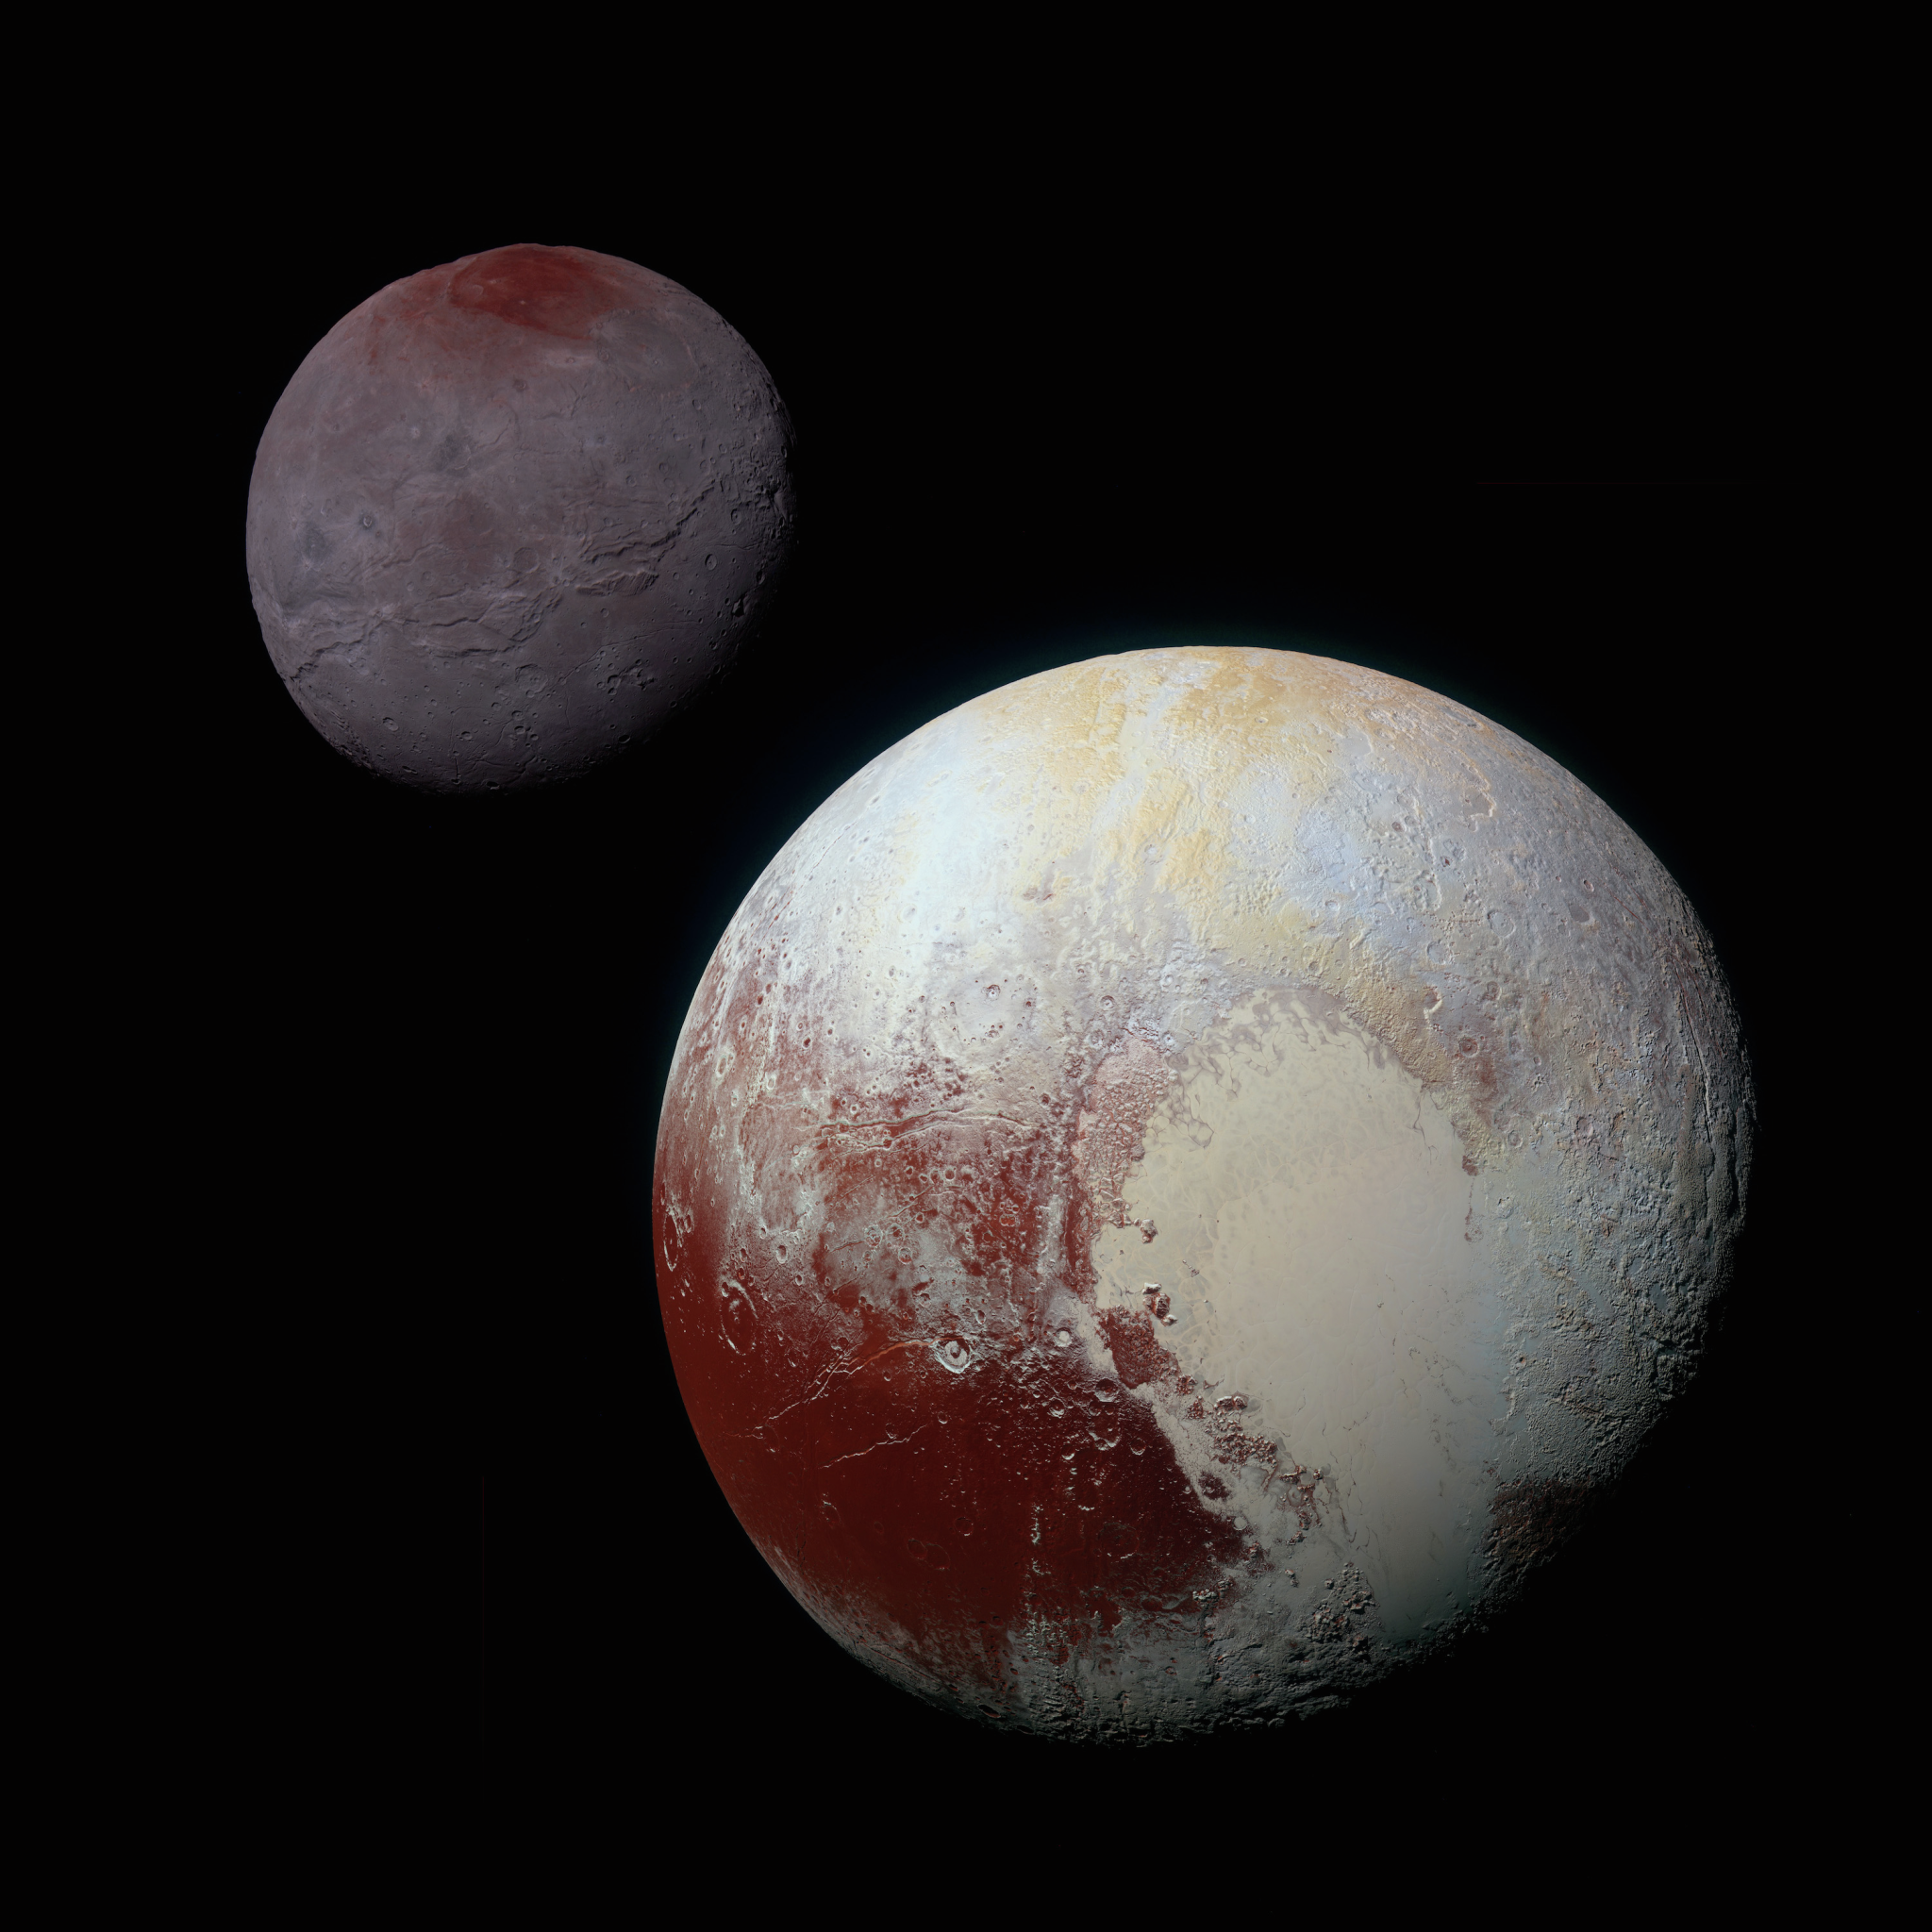 Pluto and its largest moon, Charon, are two of the best-known residents of the Kuiper Belt.